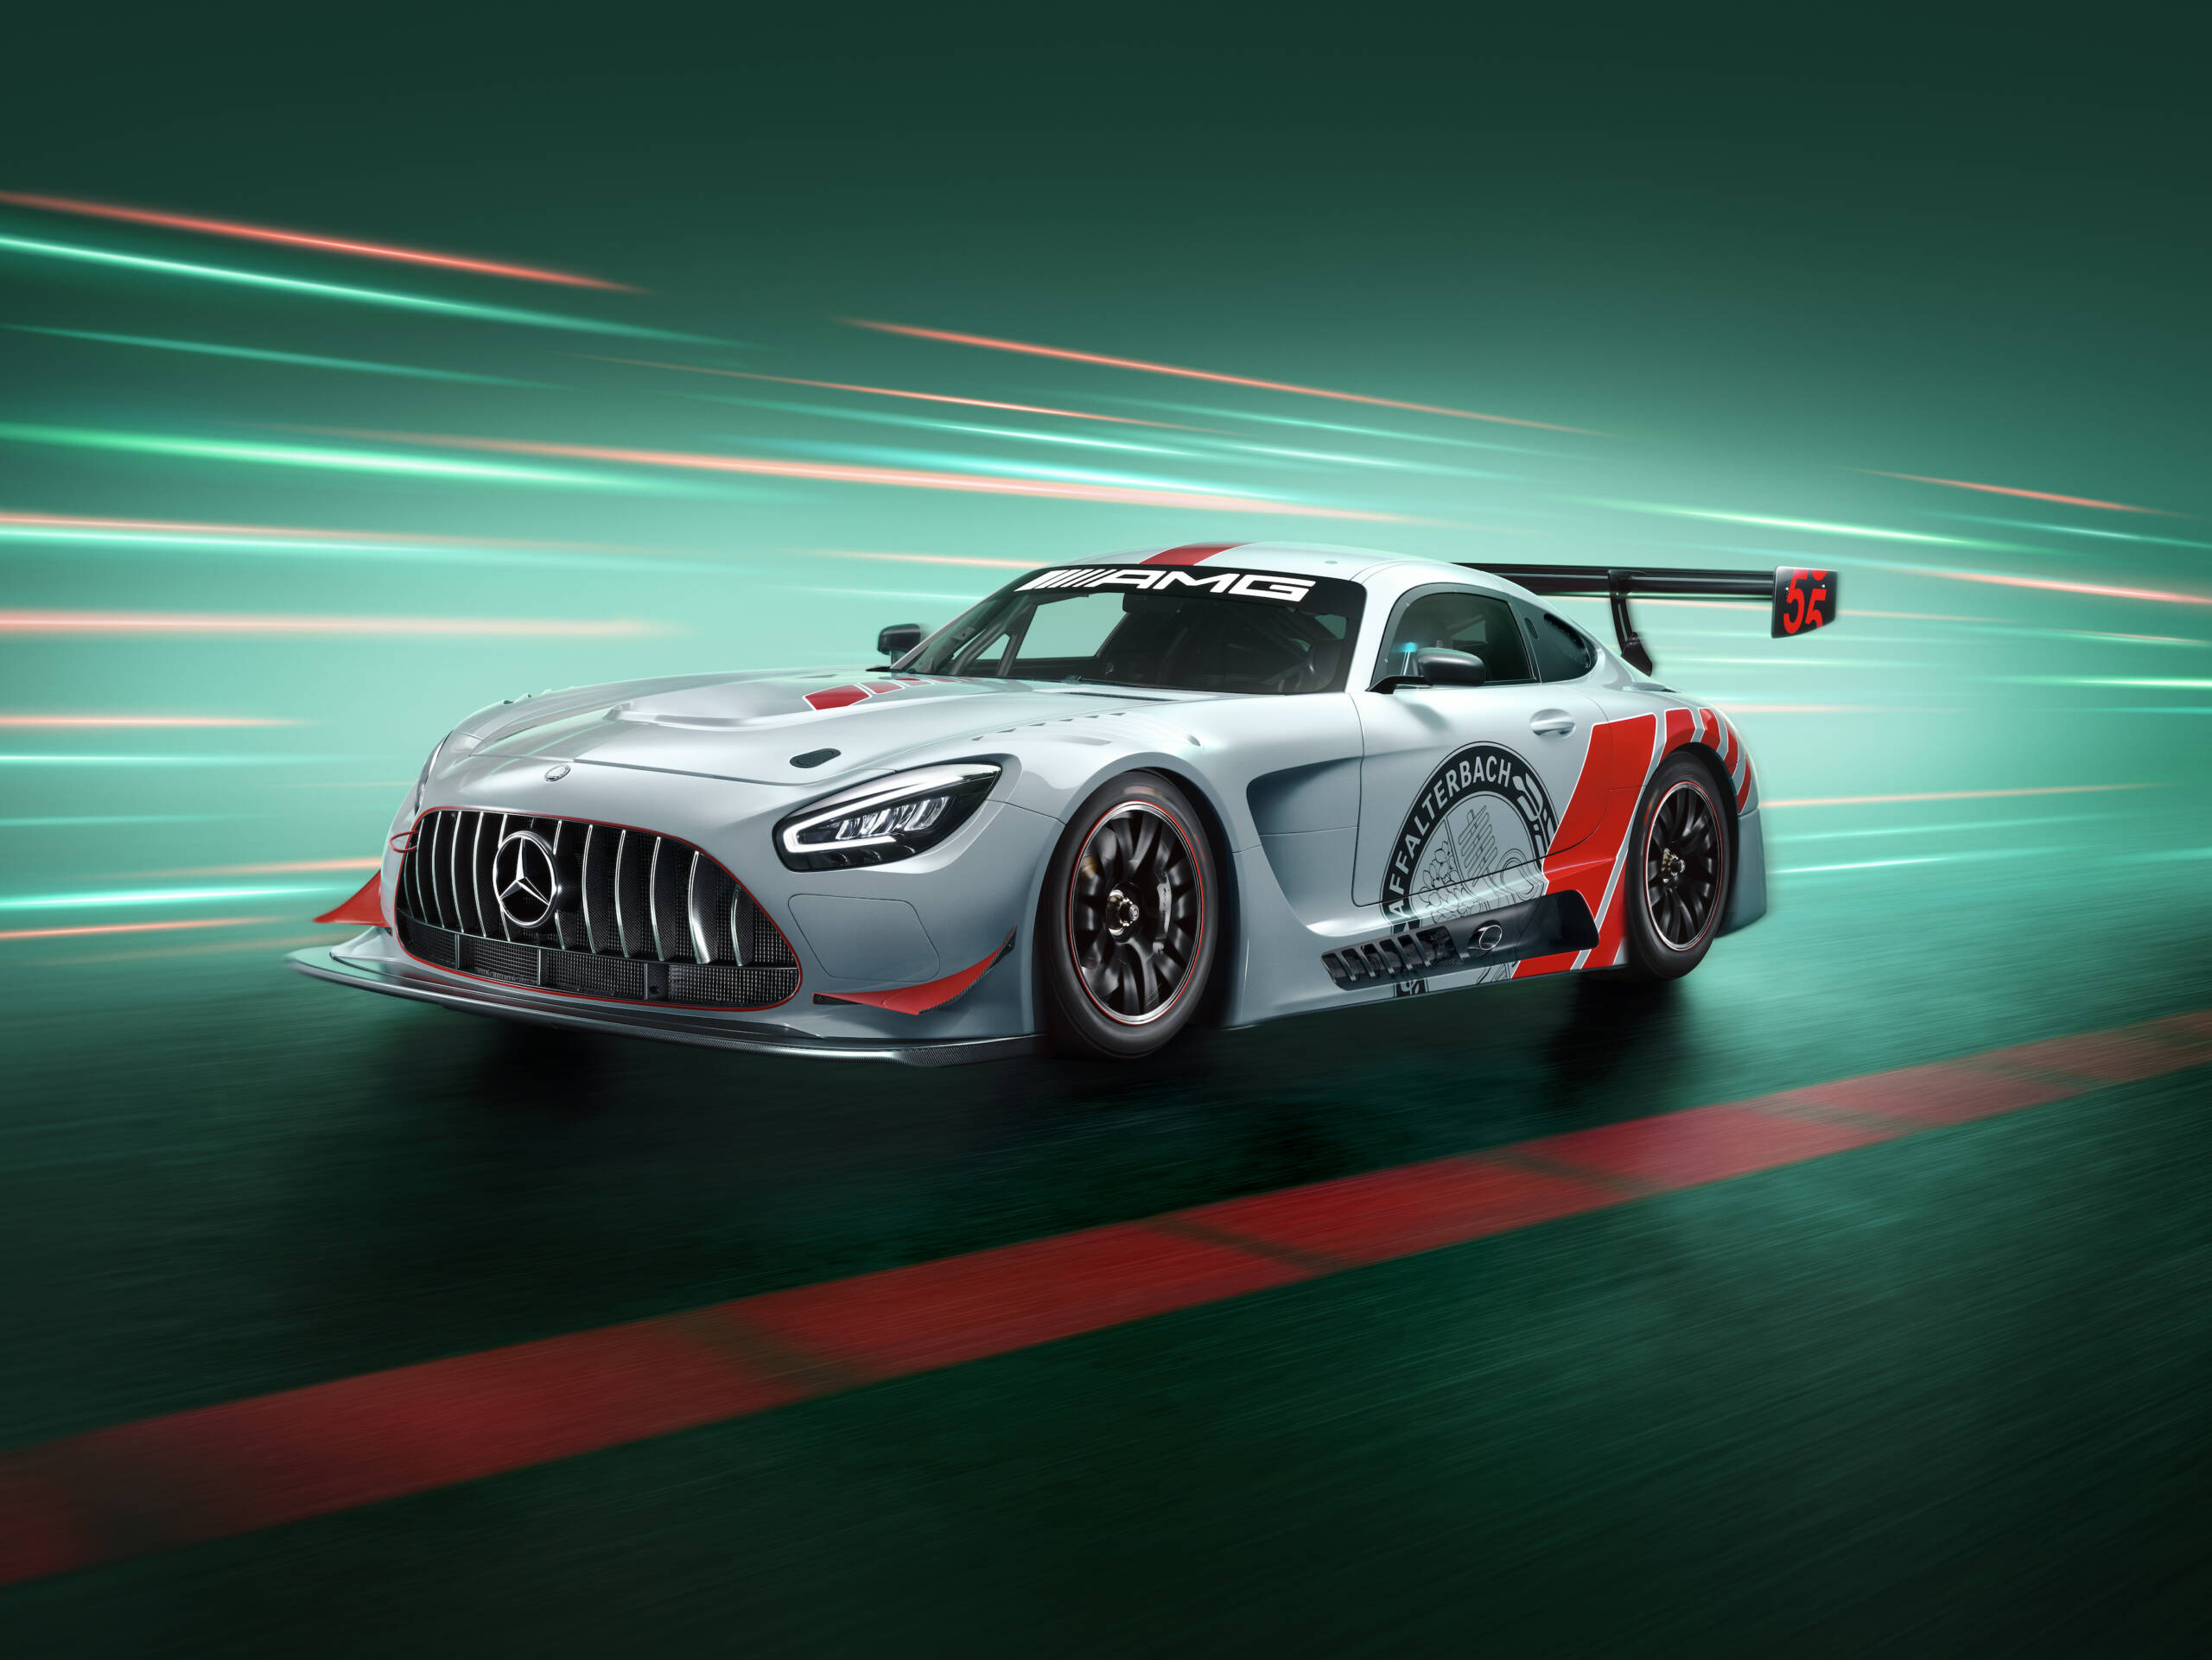 Mercedes-AMG GT3 as a strictly limited EDITION 55 special series